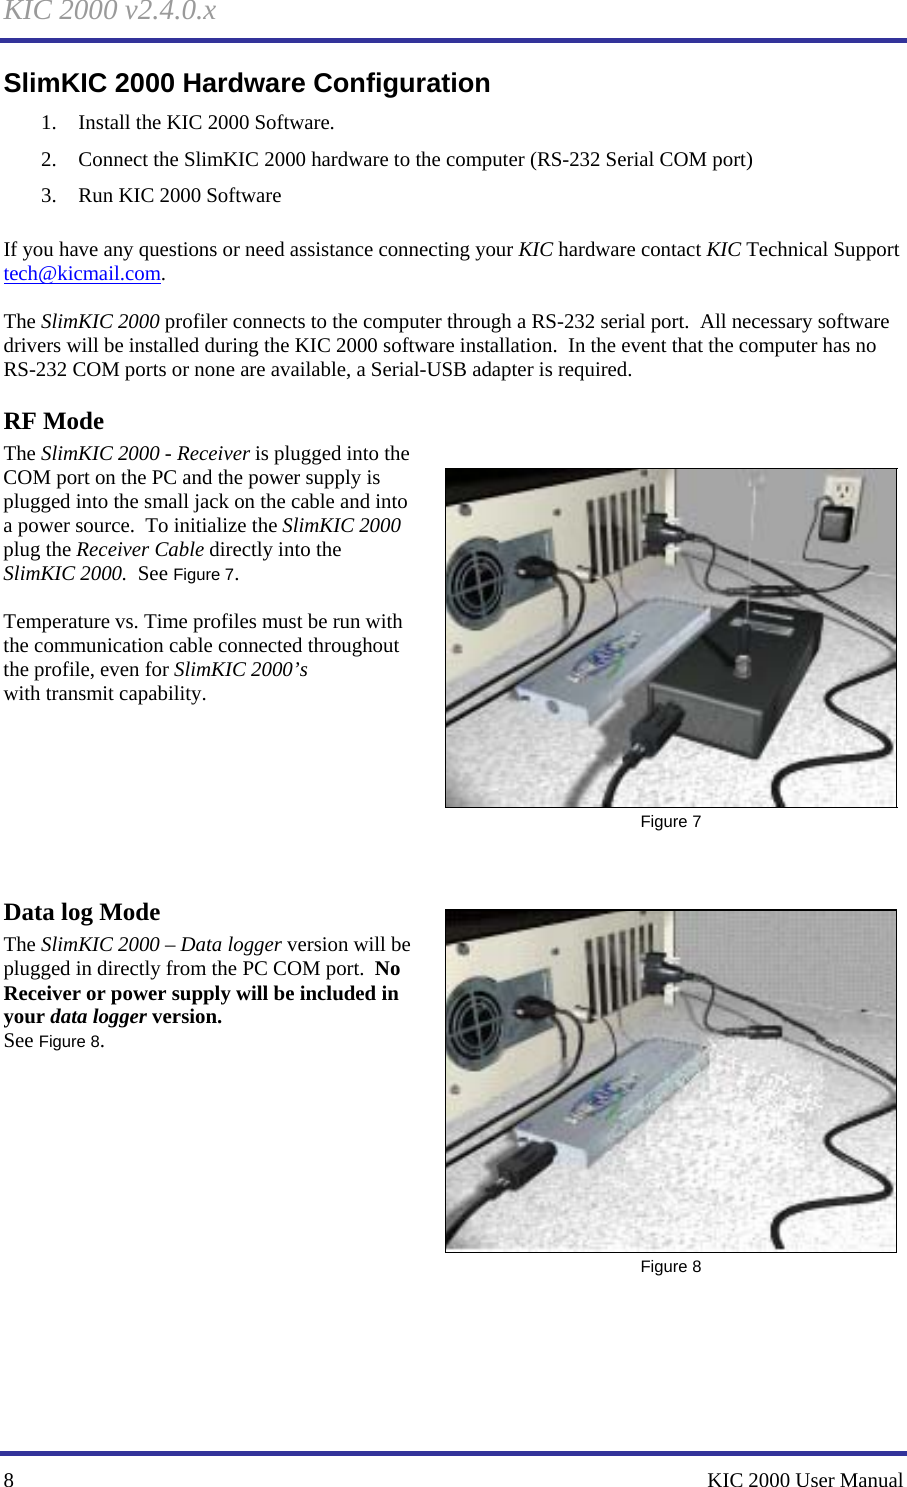 KIC 2000 v2.4.0.x 8    KIC 2000 User Manual SlimKIC 2000 Hardware Configuration 1. Install the KIC 2000 Software. 2. Connect the SlimKIC 2000 hardware to the computer (RS-232 Serial COM port) 3. Run KIC 2000 Software  If you have any questions or need assistance connecting your KIC hardware contact KIC Technical Support tech@kicmail.com.    The SlimKIC 2000 profiler connects to the computer through a RS-232 serial port.  All necessary software drivers will be installed during the KIC 2000 software installation.  In the event that the computer has no RS-232 COM ports or none are available, a Serial-USB adapter is required.   RF Mode The SlimKIC 2000 - Receiver is plugged into the COM port on the PC and the power supply is plugged into the small jack on the cable and into a power source.  To initialize the SlimKIC 2000 plug the Receiver Cable directly into the SlimKIC 2000.  See Figure 7.    Temperature vs. Time profiles must be run with the communication cable connected throughout the profile, even for SlimKIC 2000’s  with transmit capability.        Data log Mode The SlimKIC 2000 – Data logger version will be plugged in directly from the PC COM port.  No Receiver or power supply will be included in your data logger version. See Figure 8.                 Figure 7  Figure 8 